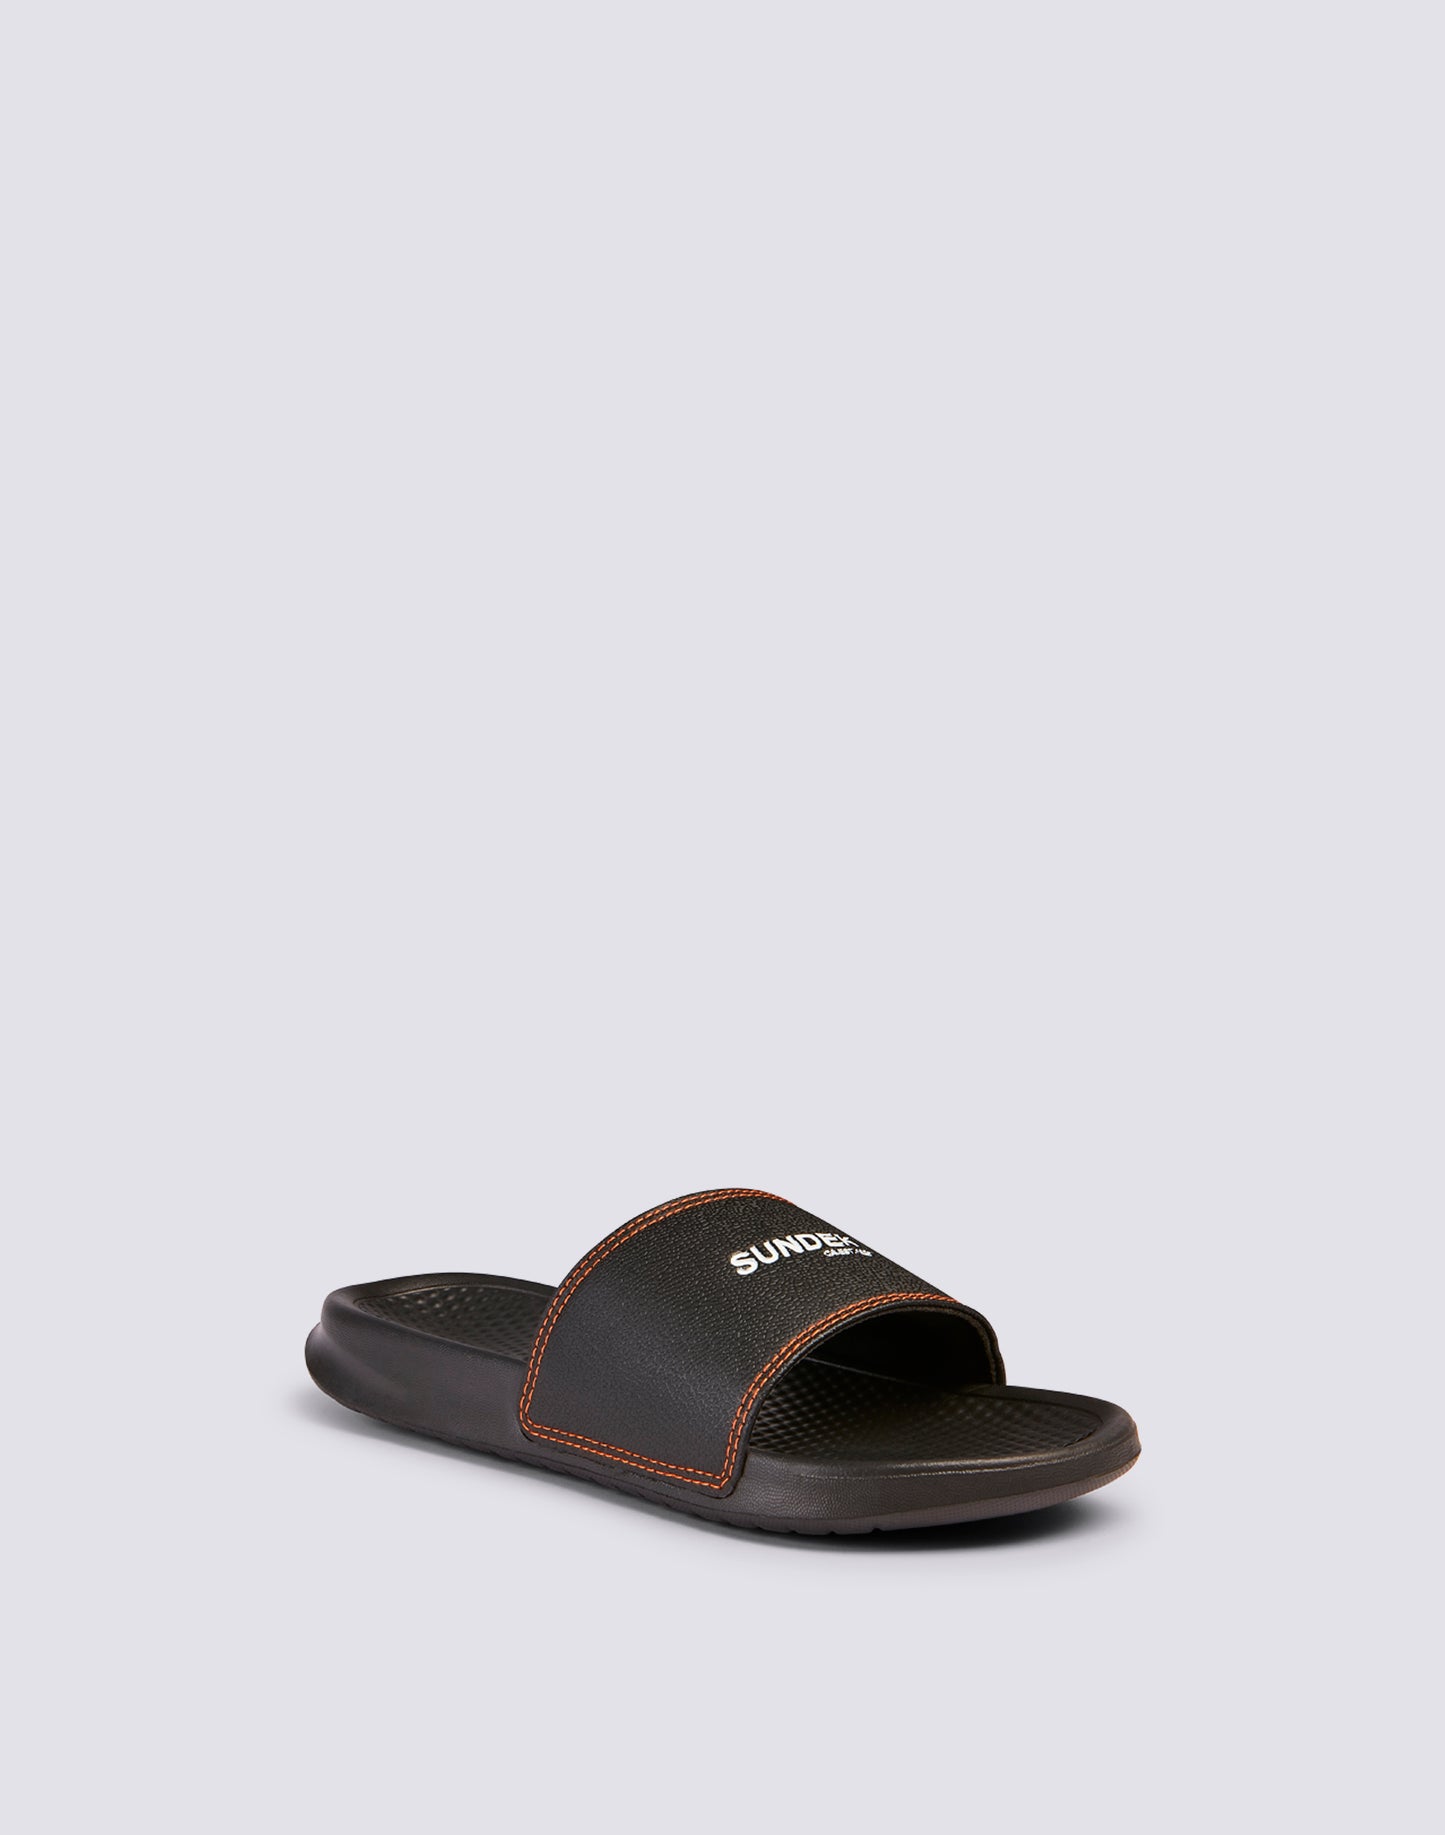 BAND SANDALS WITH CONTRASTING STITCHING